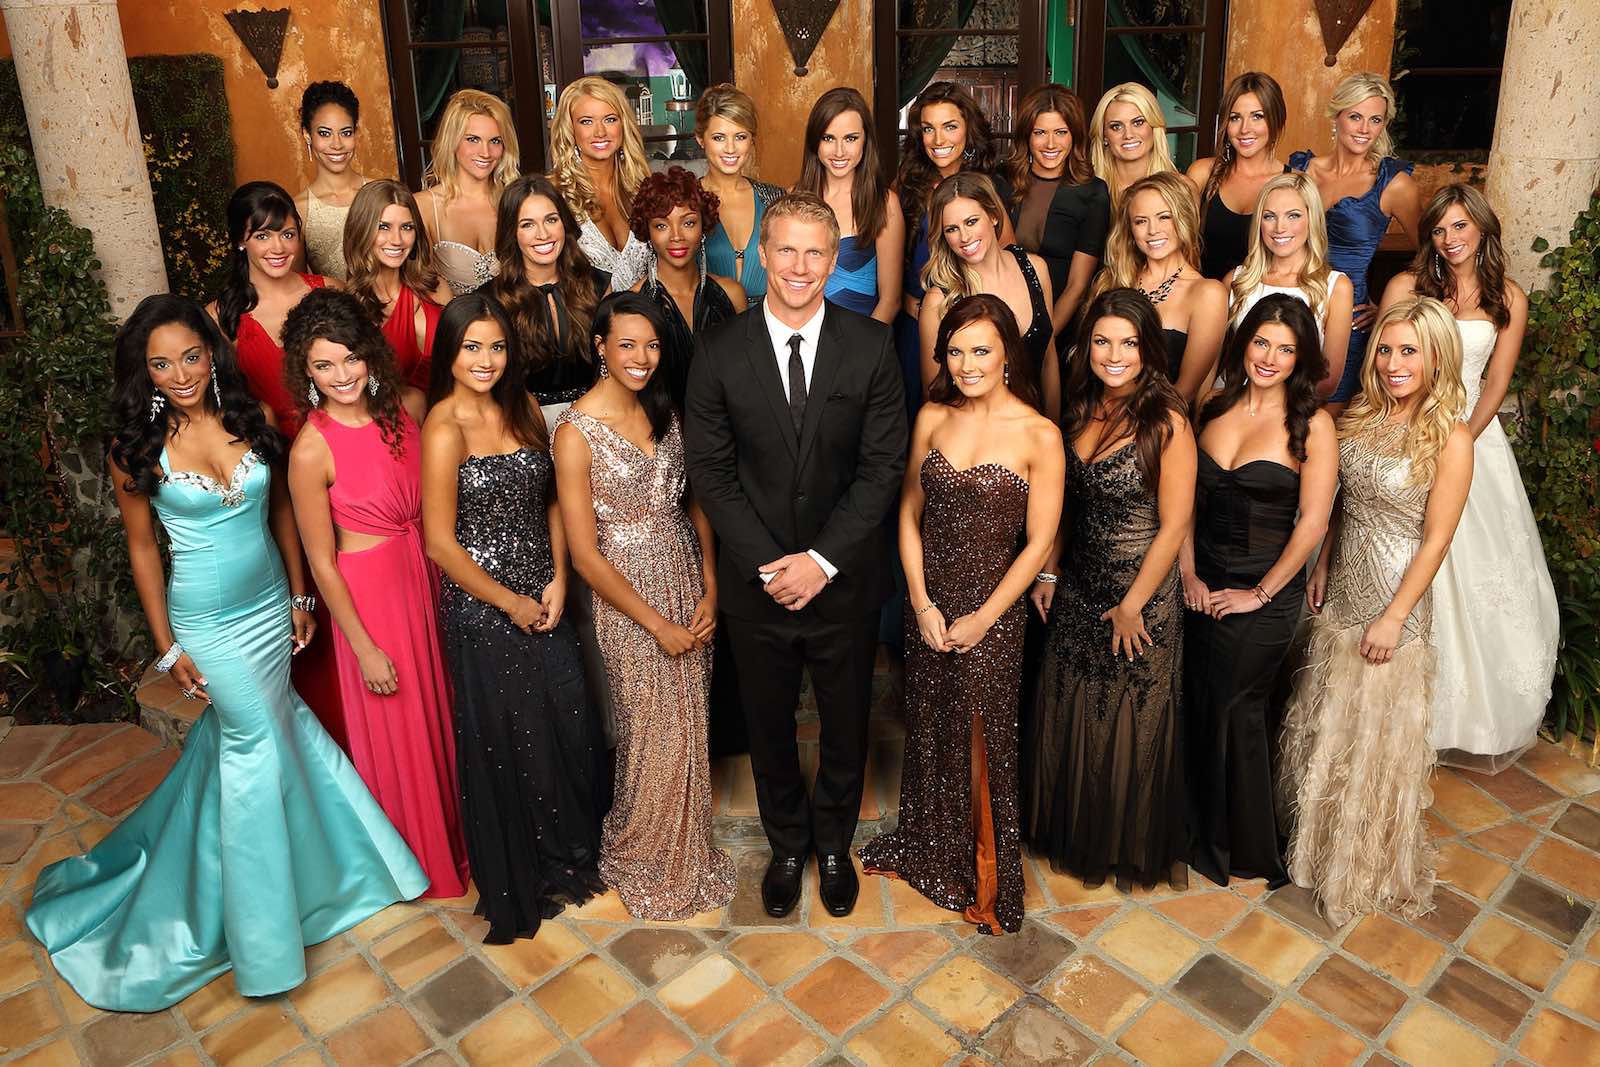 The entire 'Bachelor' franchise has an issue with diverse casting. While they're trying to fix it with this upcoming season, a black bachelor won't cut it. 